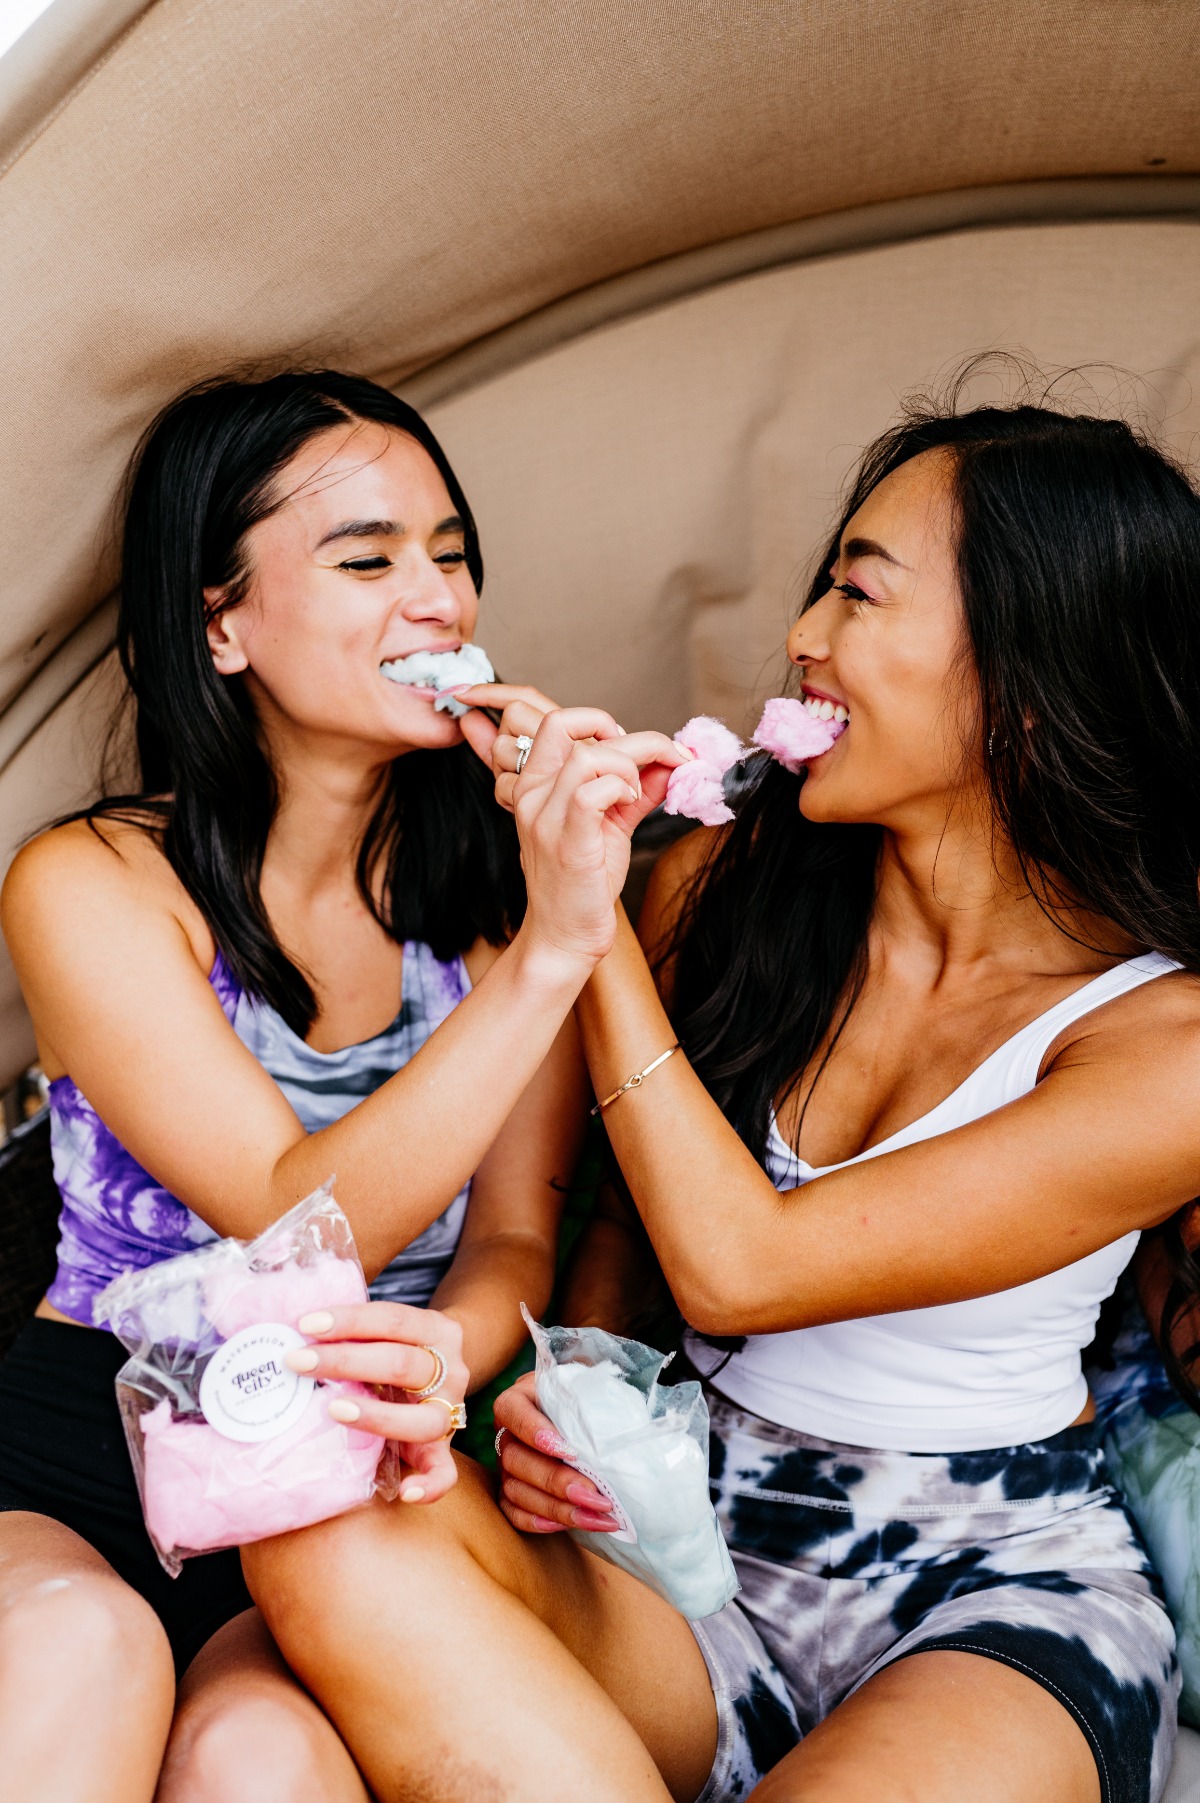 Two bachelorettes eating cotton candy